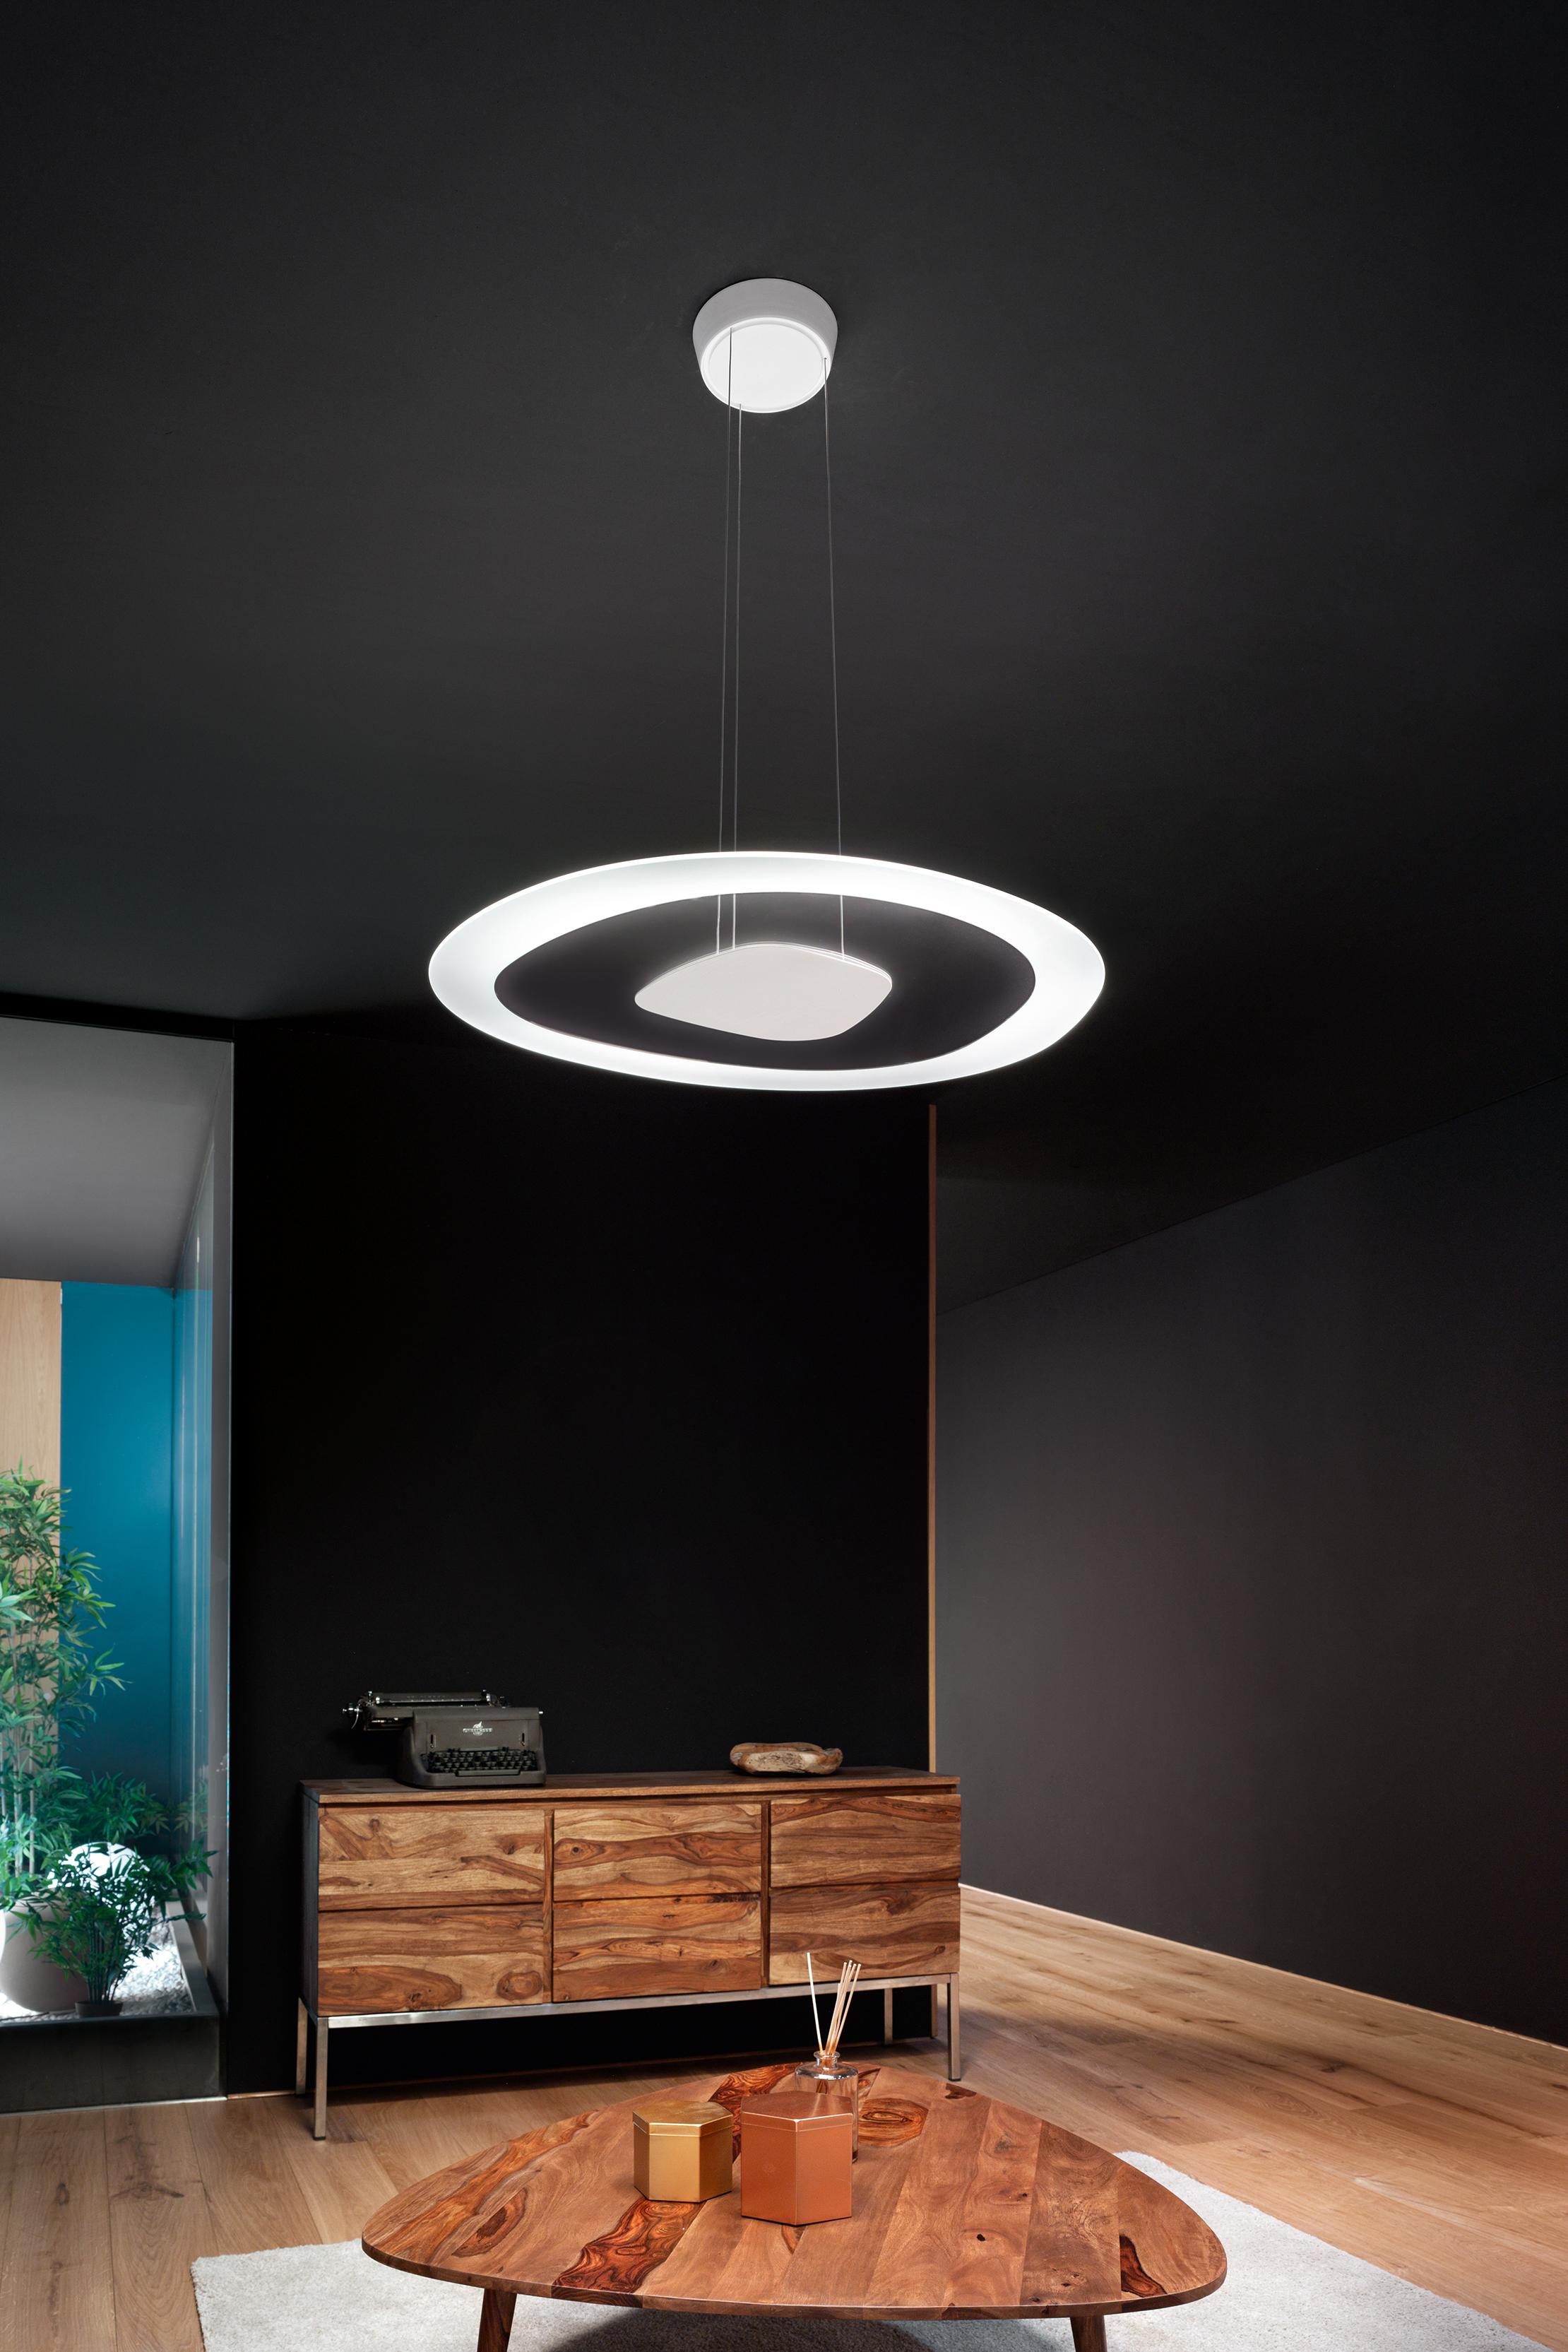 Gallery Product Antigua Suspension Linealighgroup 1280X1920 3